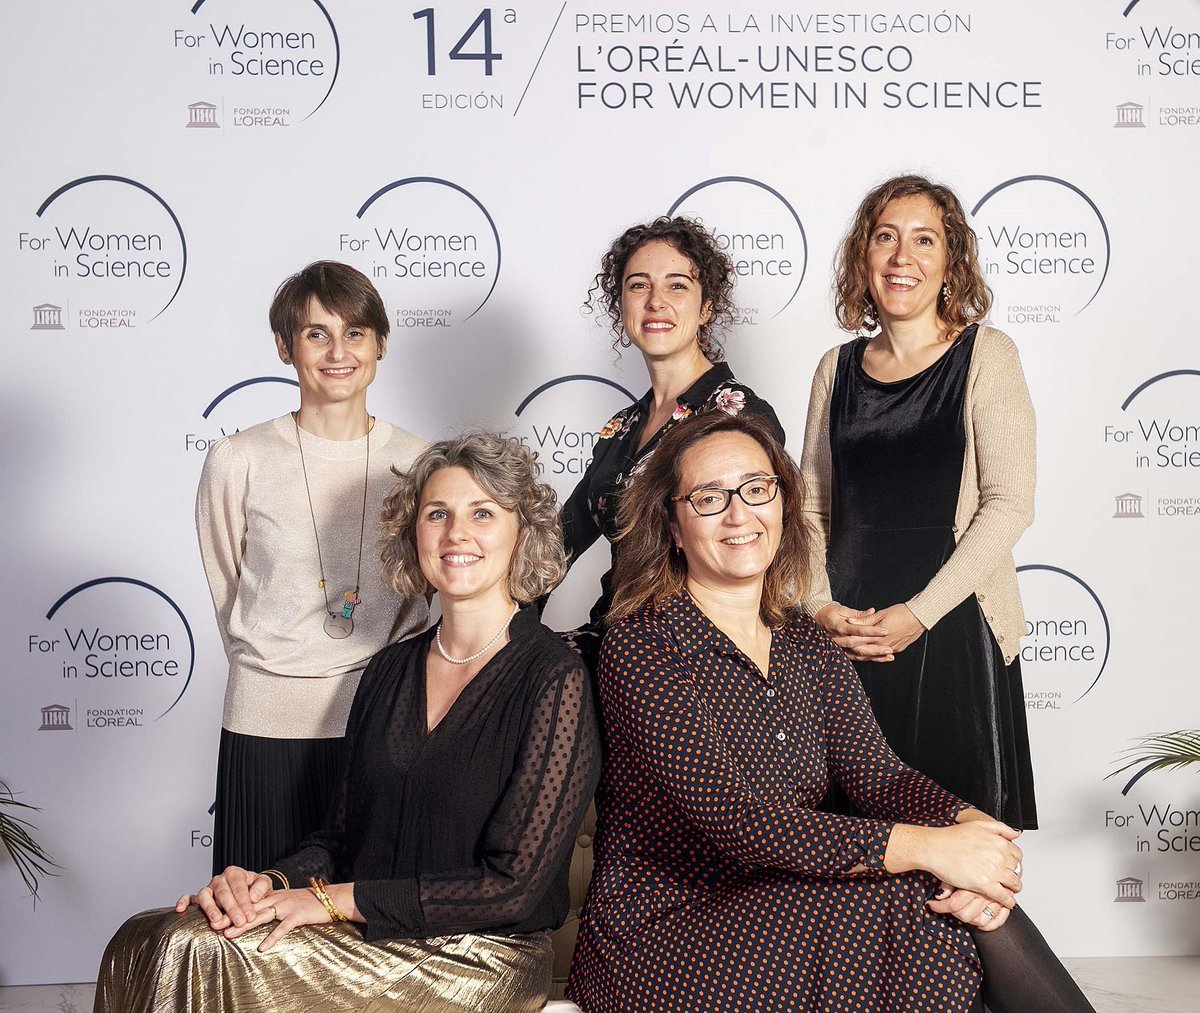 Extremely Honored to receive the L'Oréal-Unesco for 'Women in Science' award. Thank you @lorealspain for this great initiative!
#ForWomenInScience  #MujeryCiencia #FWIS